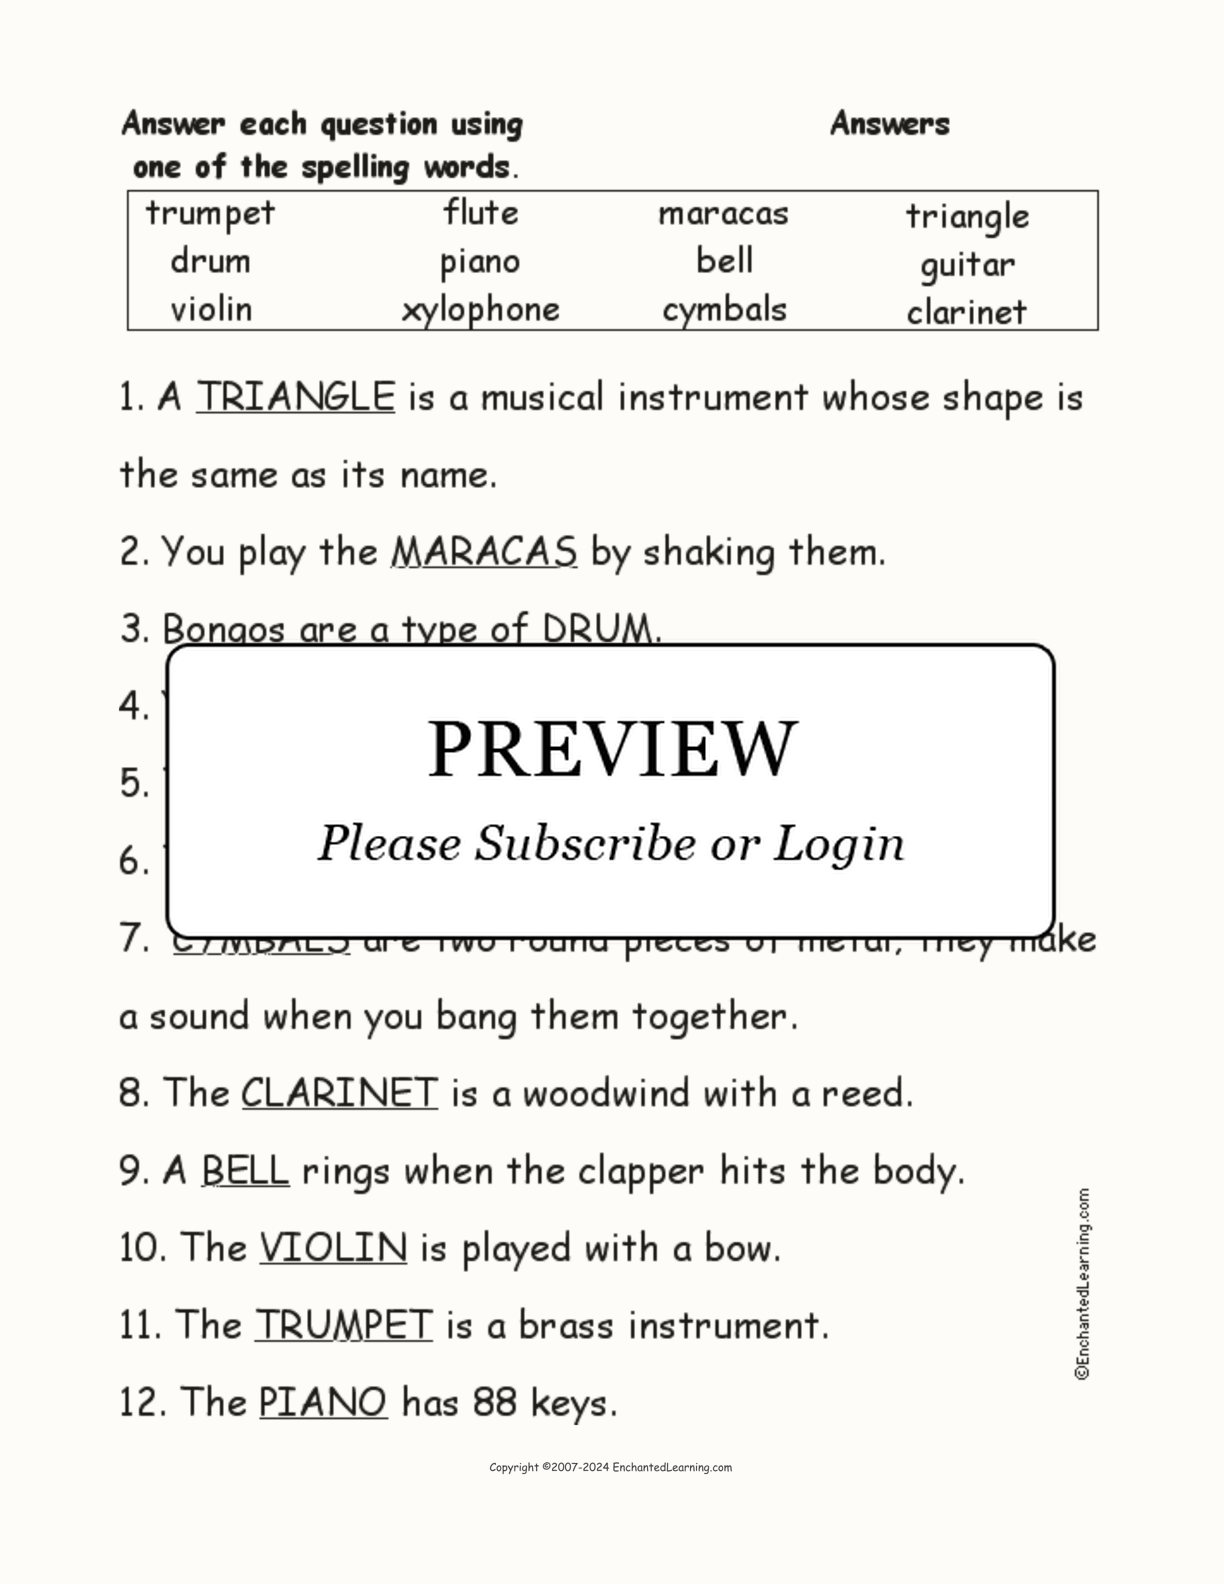 Musical Instruments: Spelling Word Questions interactive worksheet page 2